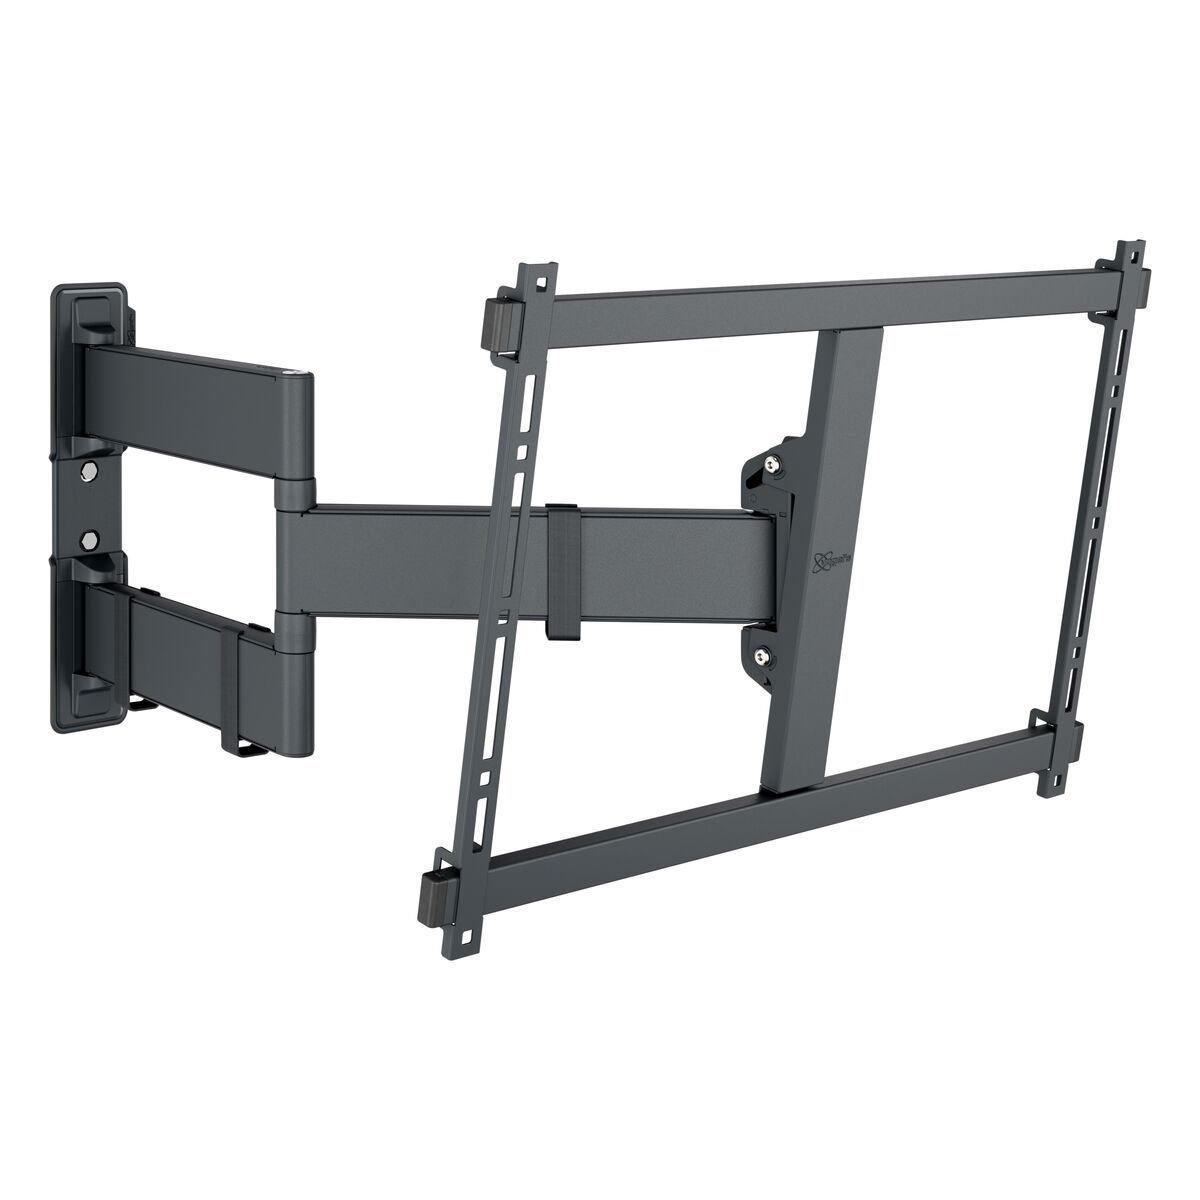 Vogel's TVM 3843 Full-Motion TV Wall Mount (black) - Suitable for 55 up to 100 inch TVs - Full motion (up to 180°) swivel - Tilt up to 10° - Product